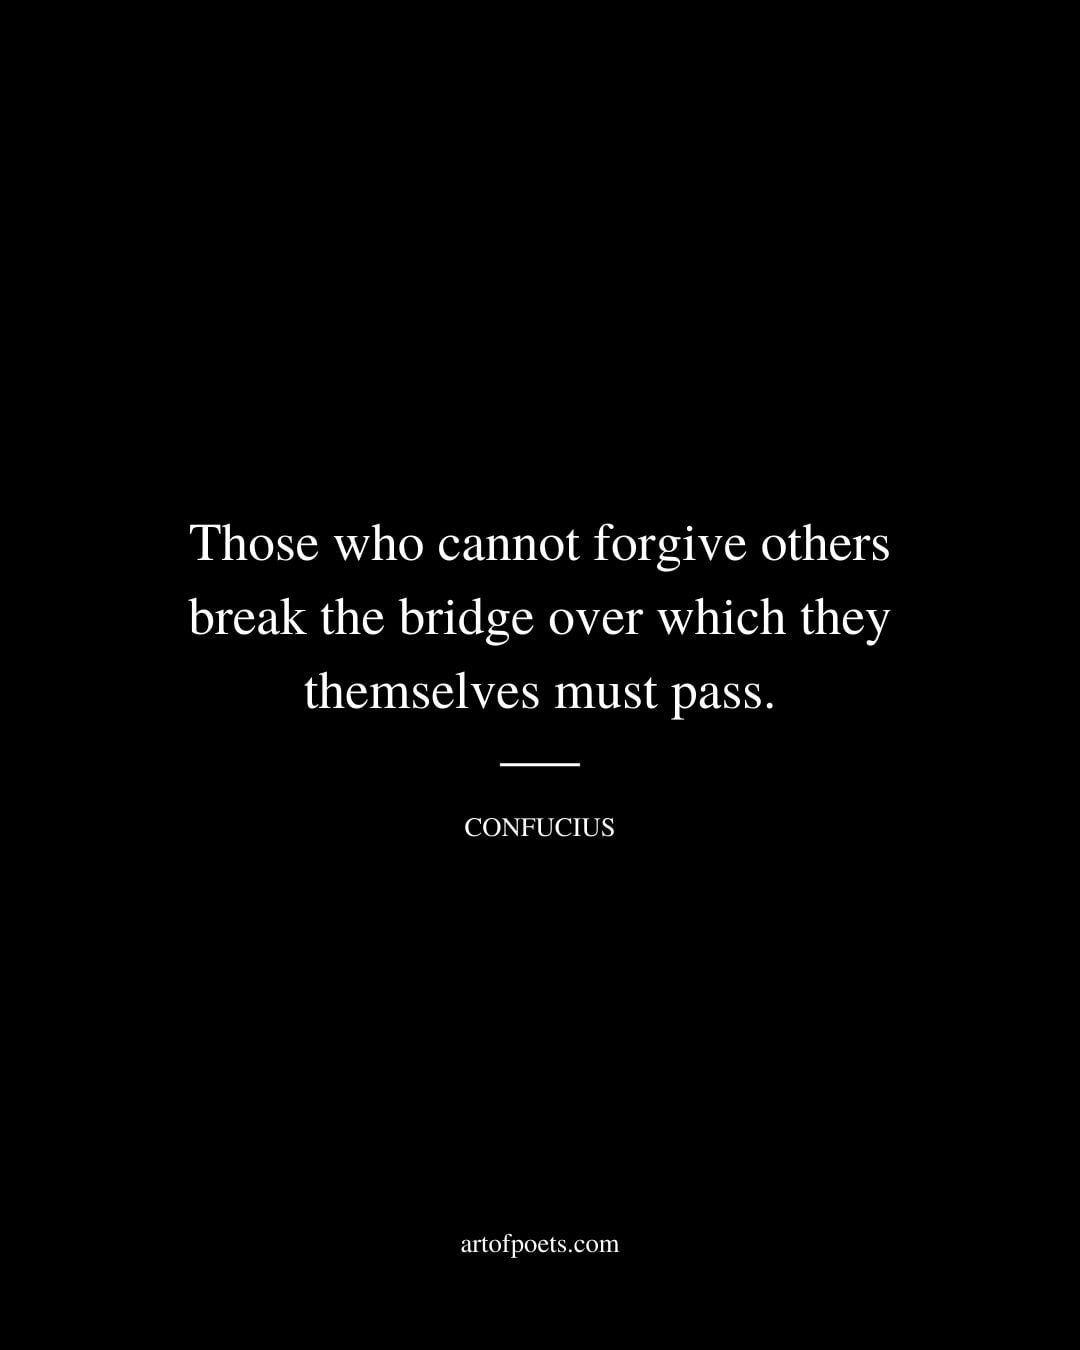 Those who cannot forgive others break the bridge over which they themselves must pass